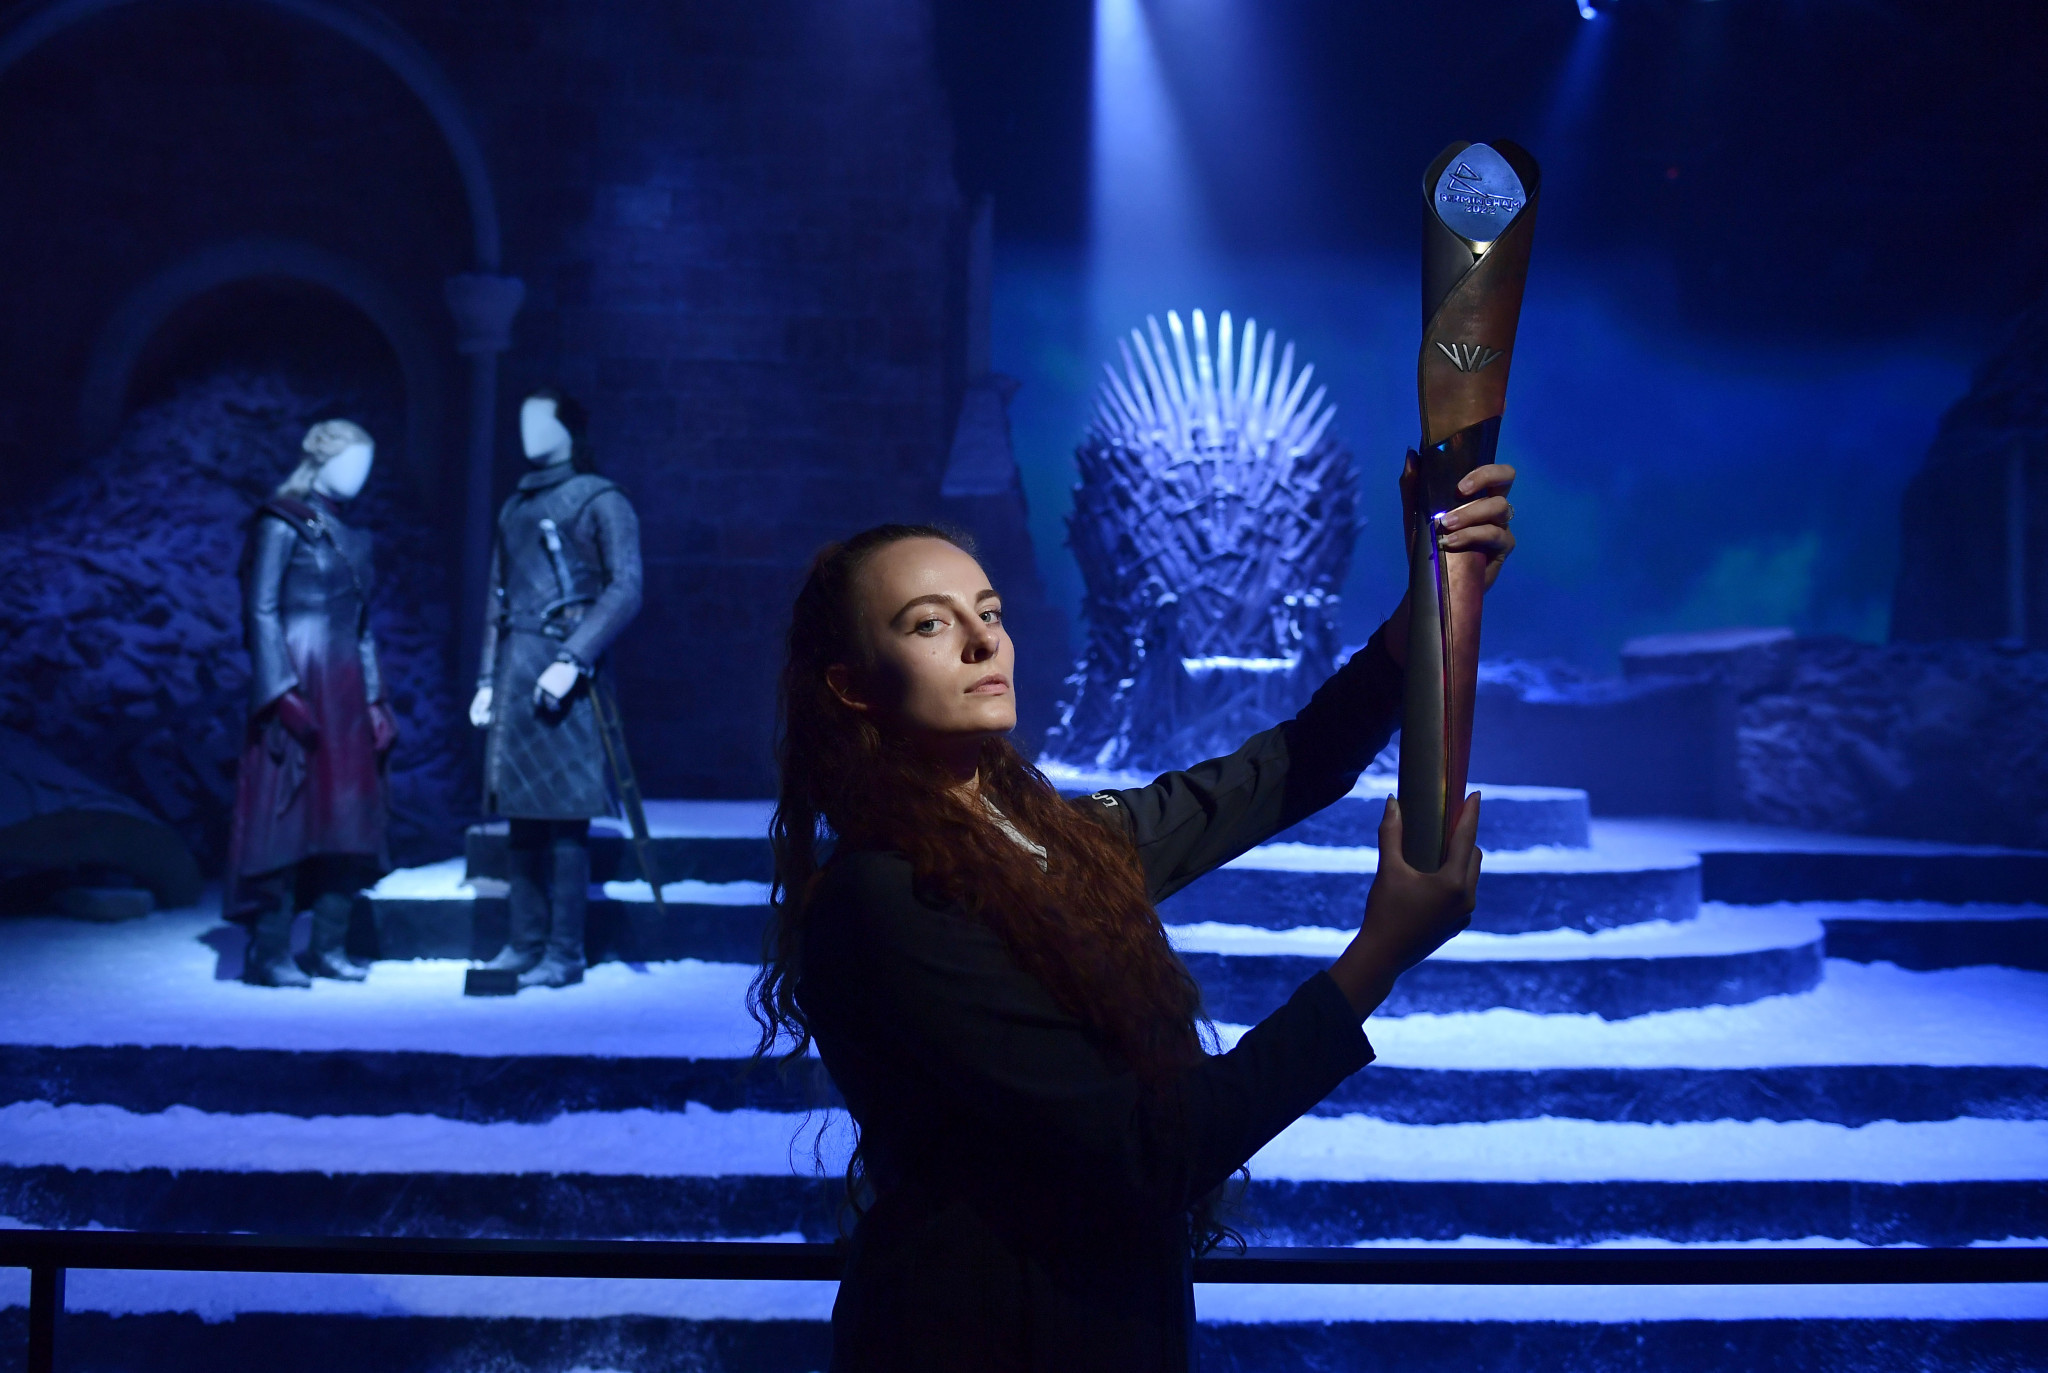 Actress Sharni Tapako-Brown holds the baton on the set of Game of Thrones  ©Getty Images